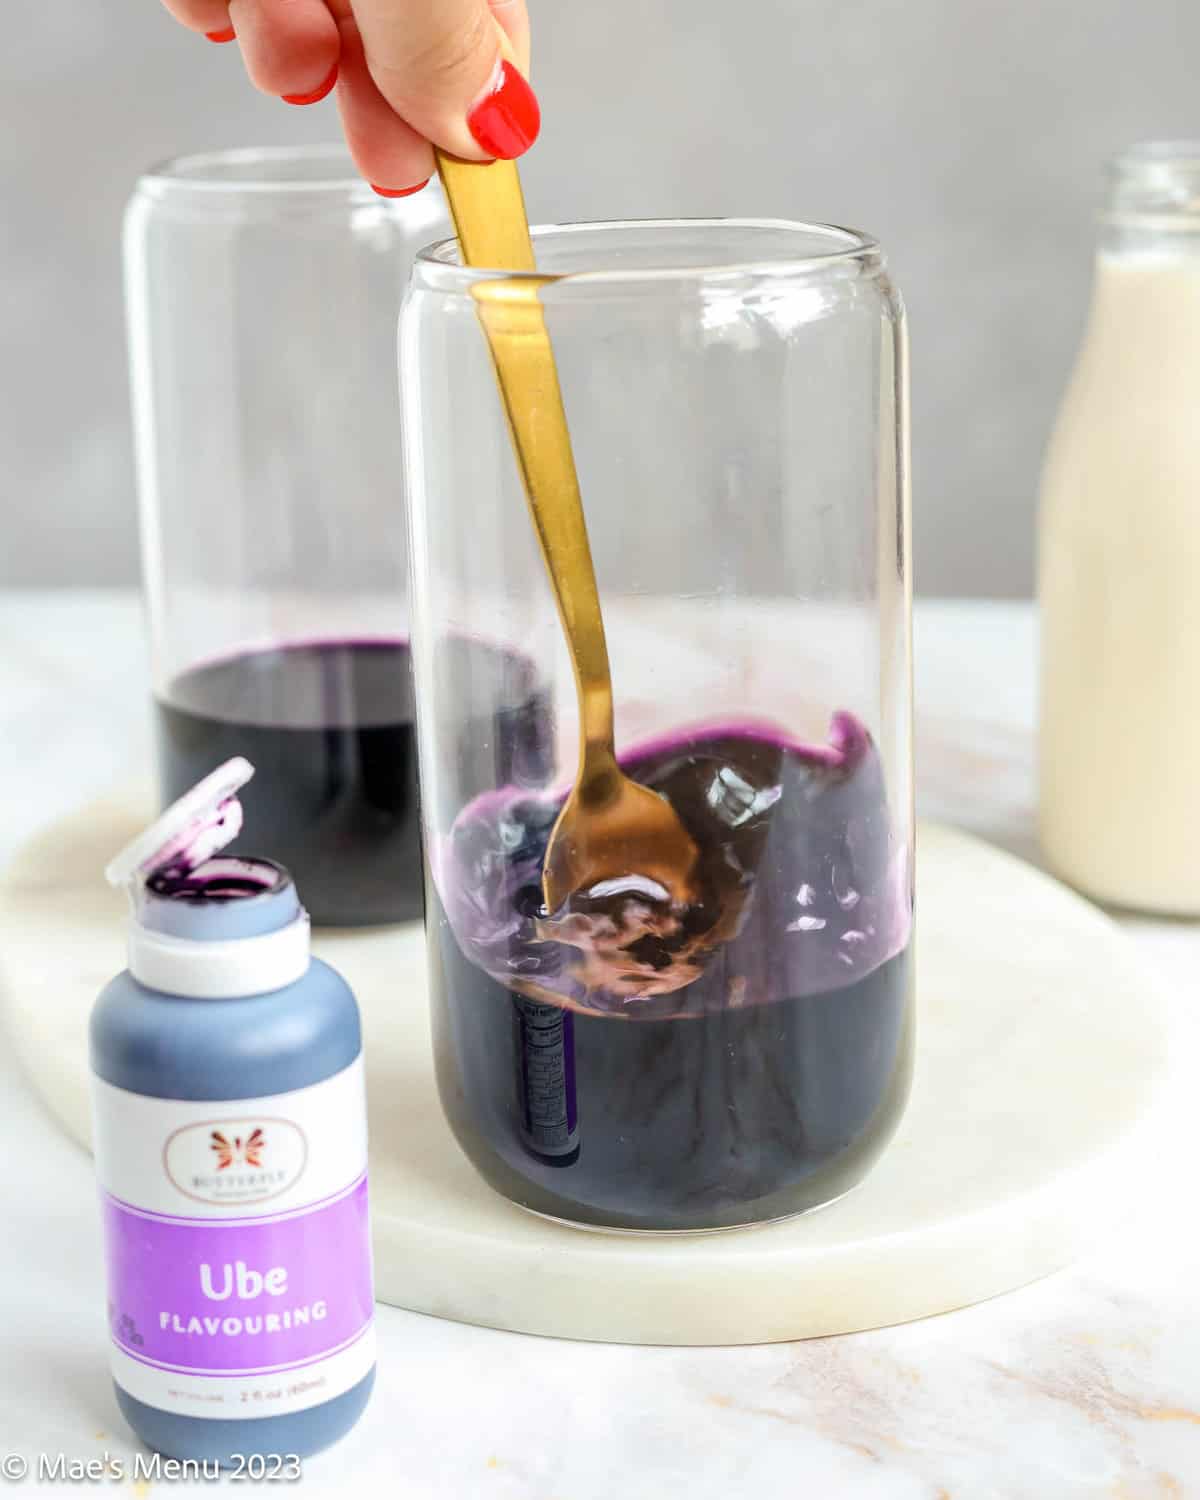 Stirring the ube and tea in the glass cups with a small container of ube flavoring in the foreground.